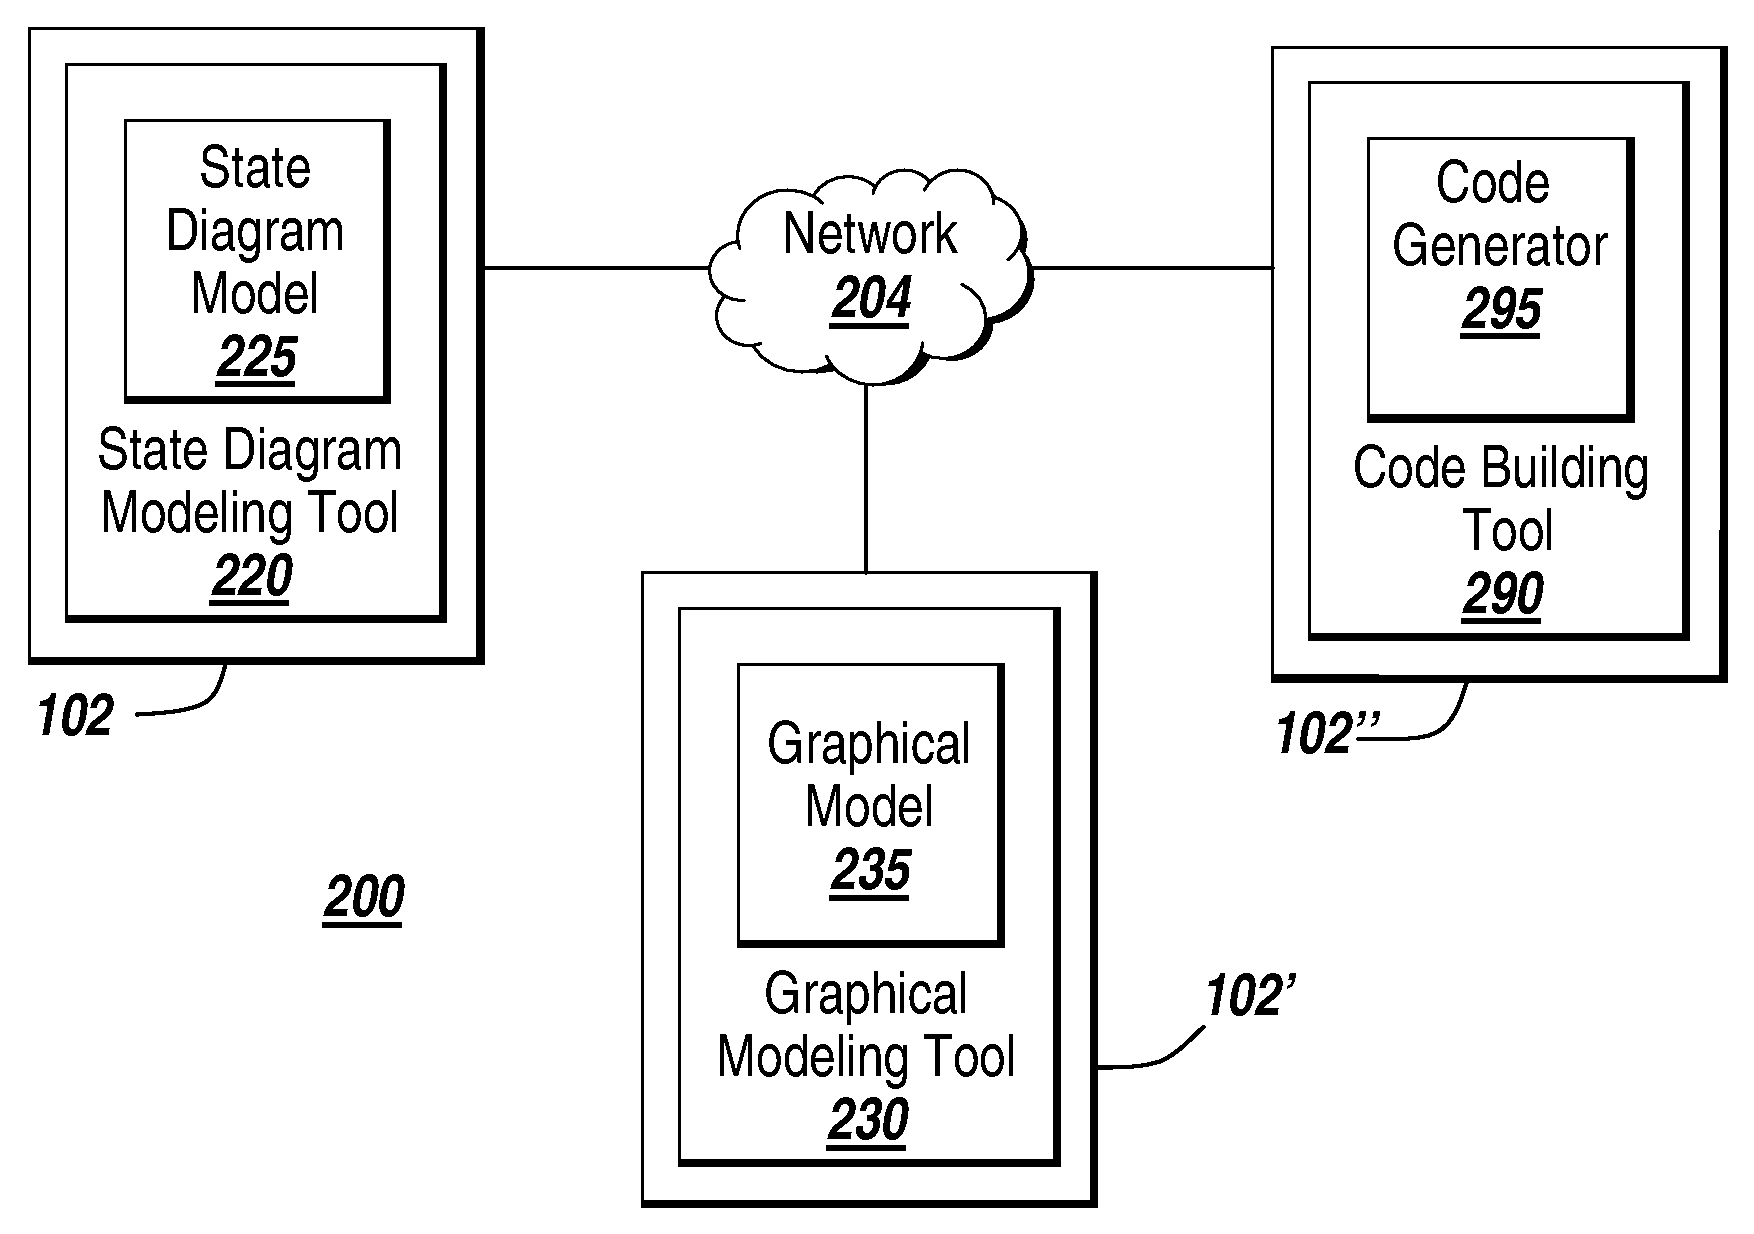 Multi-rate hierarchical state diagrams